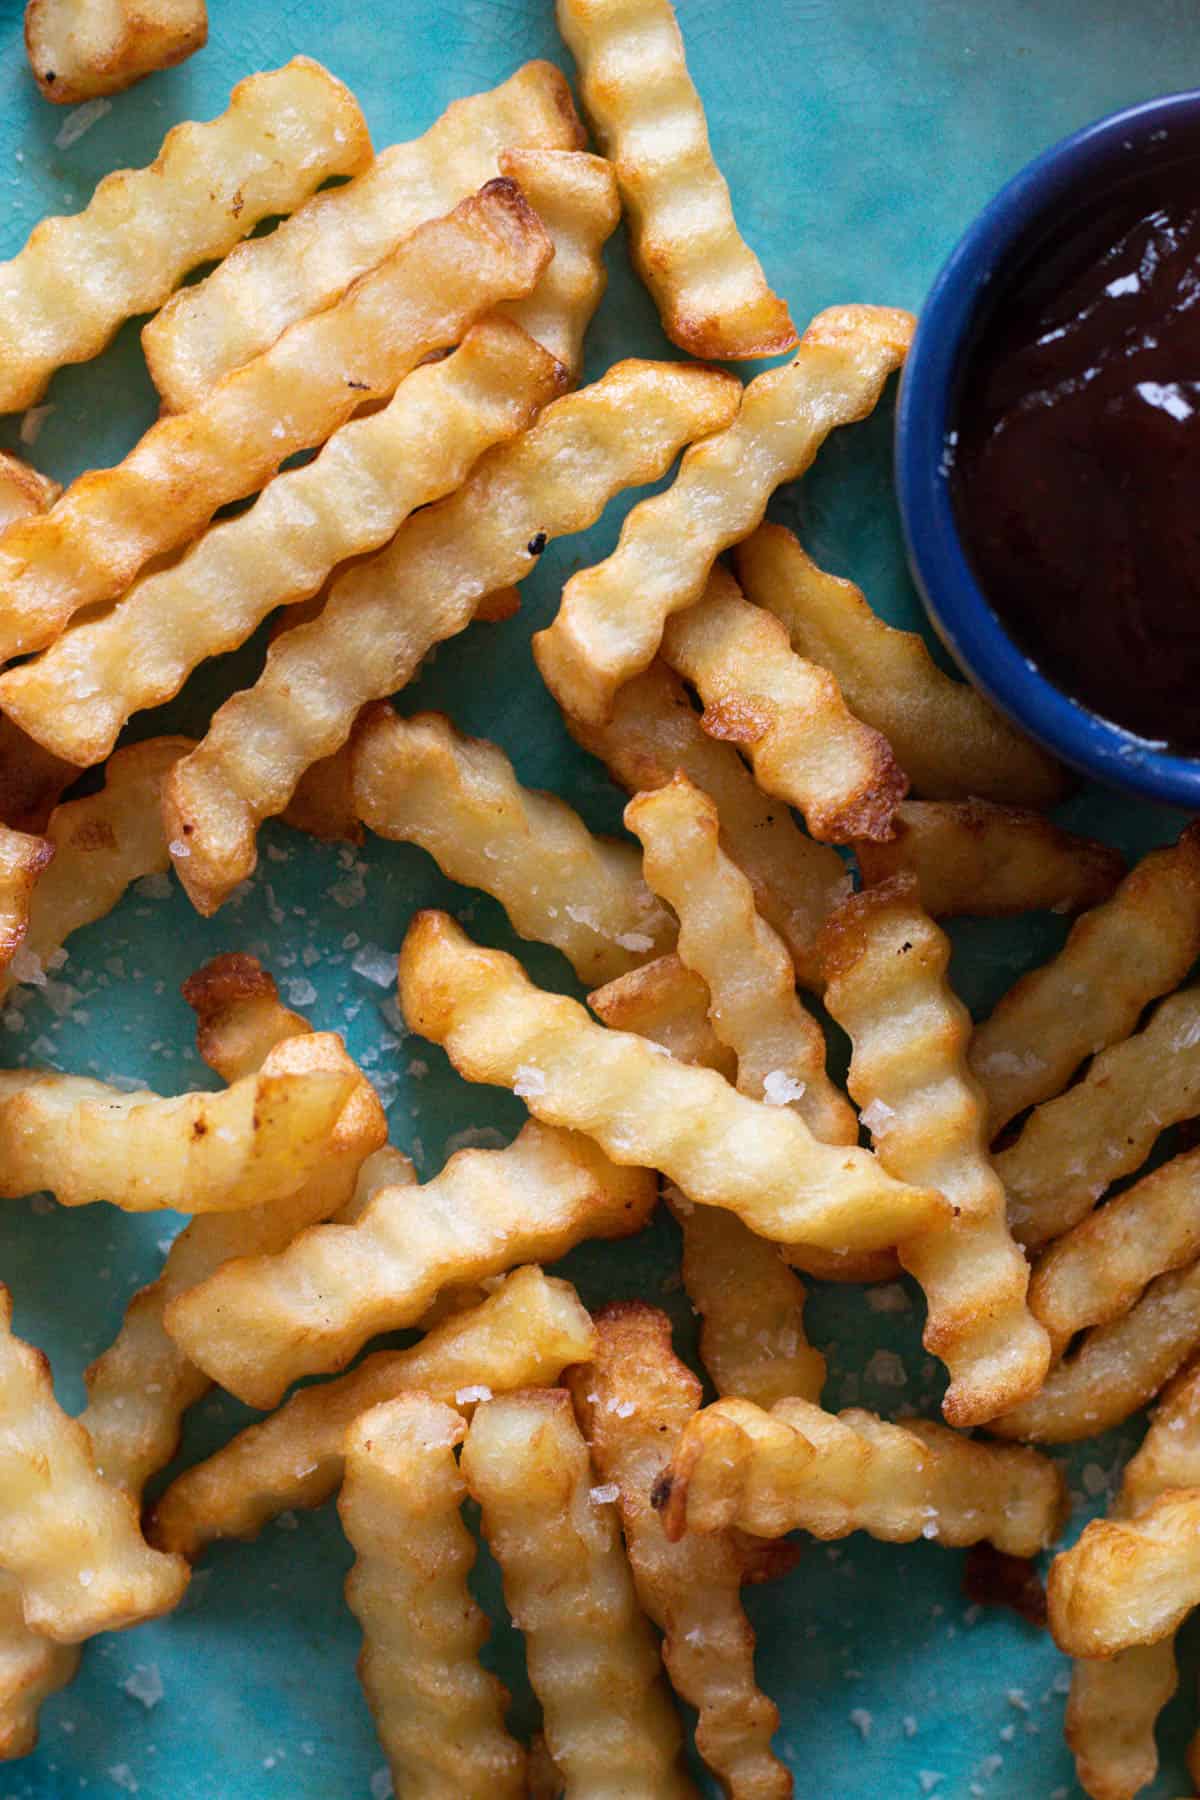 Crinkle fries on a blue plate.